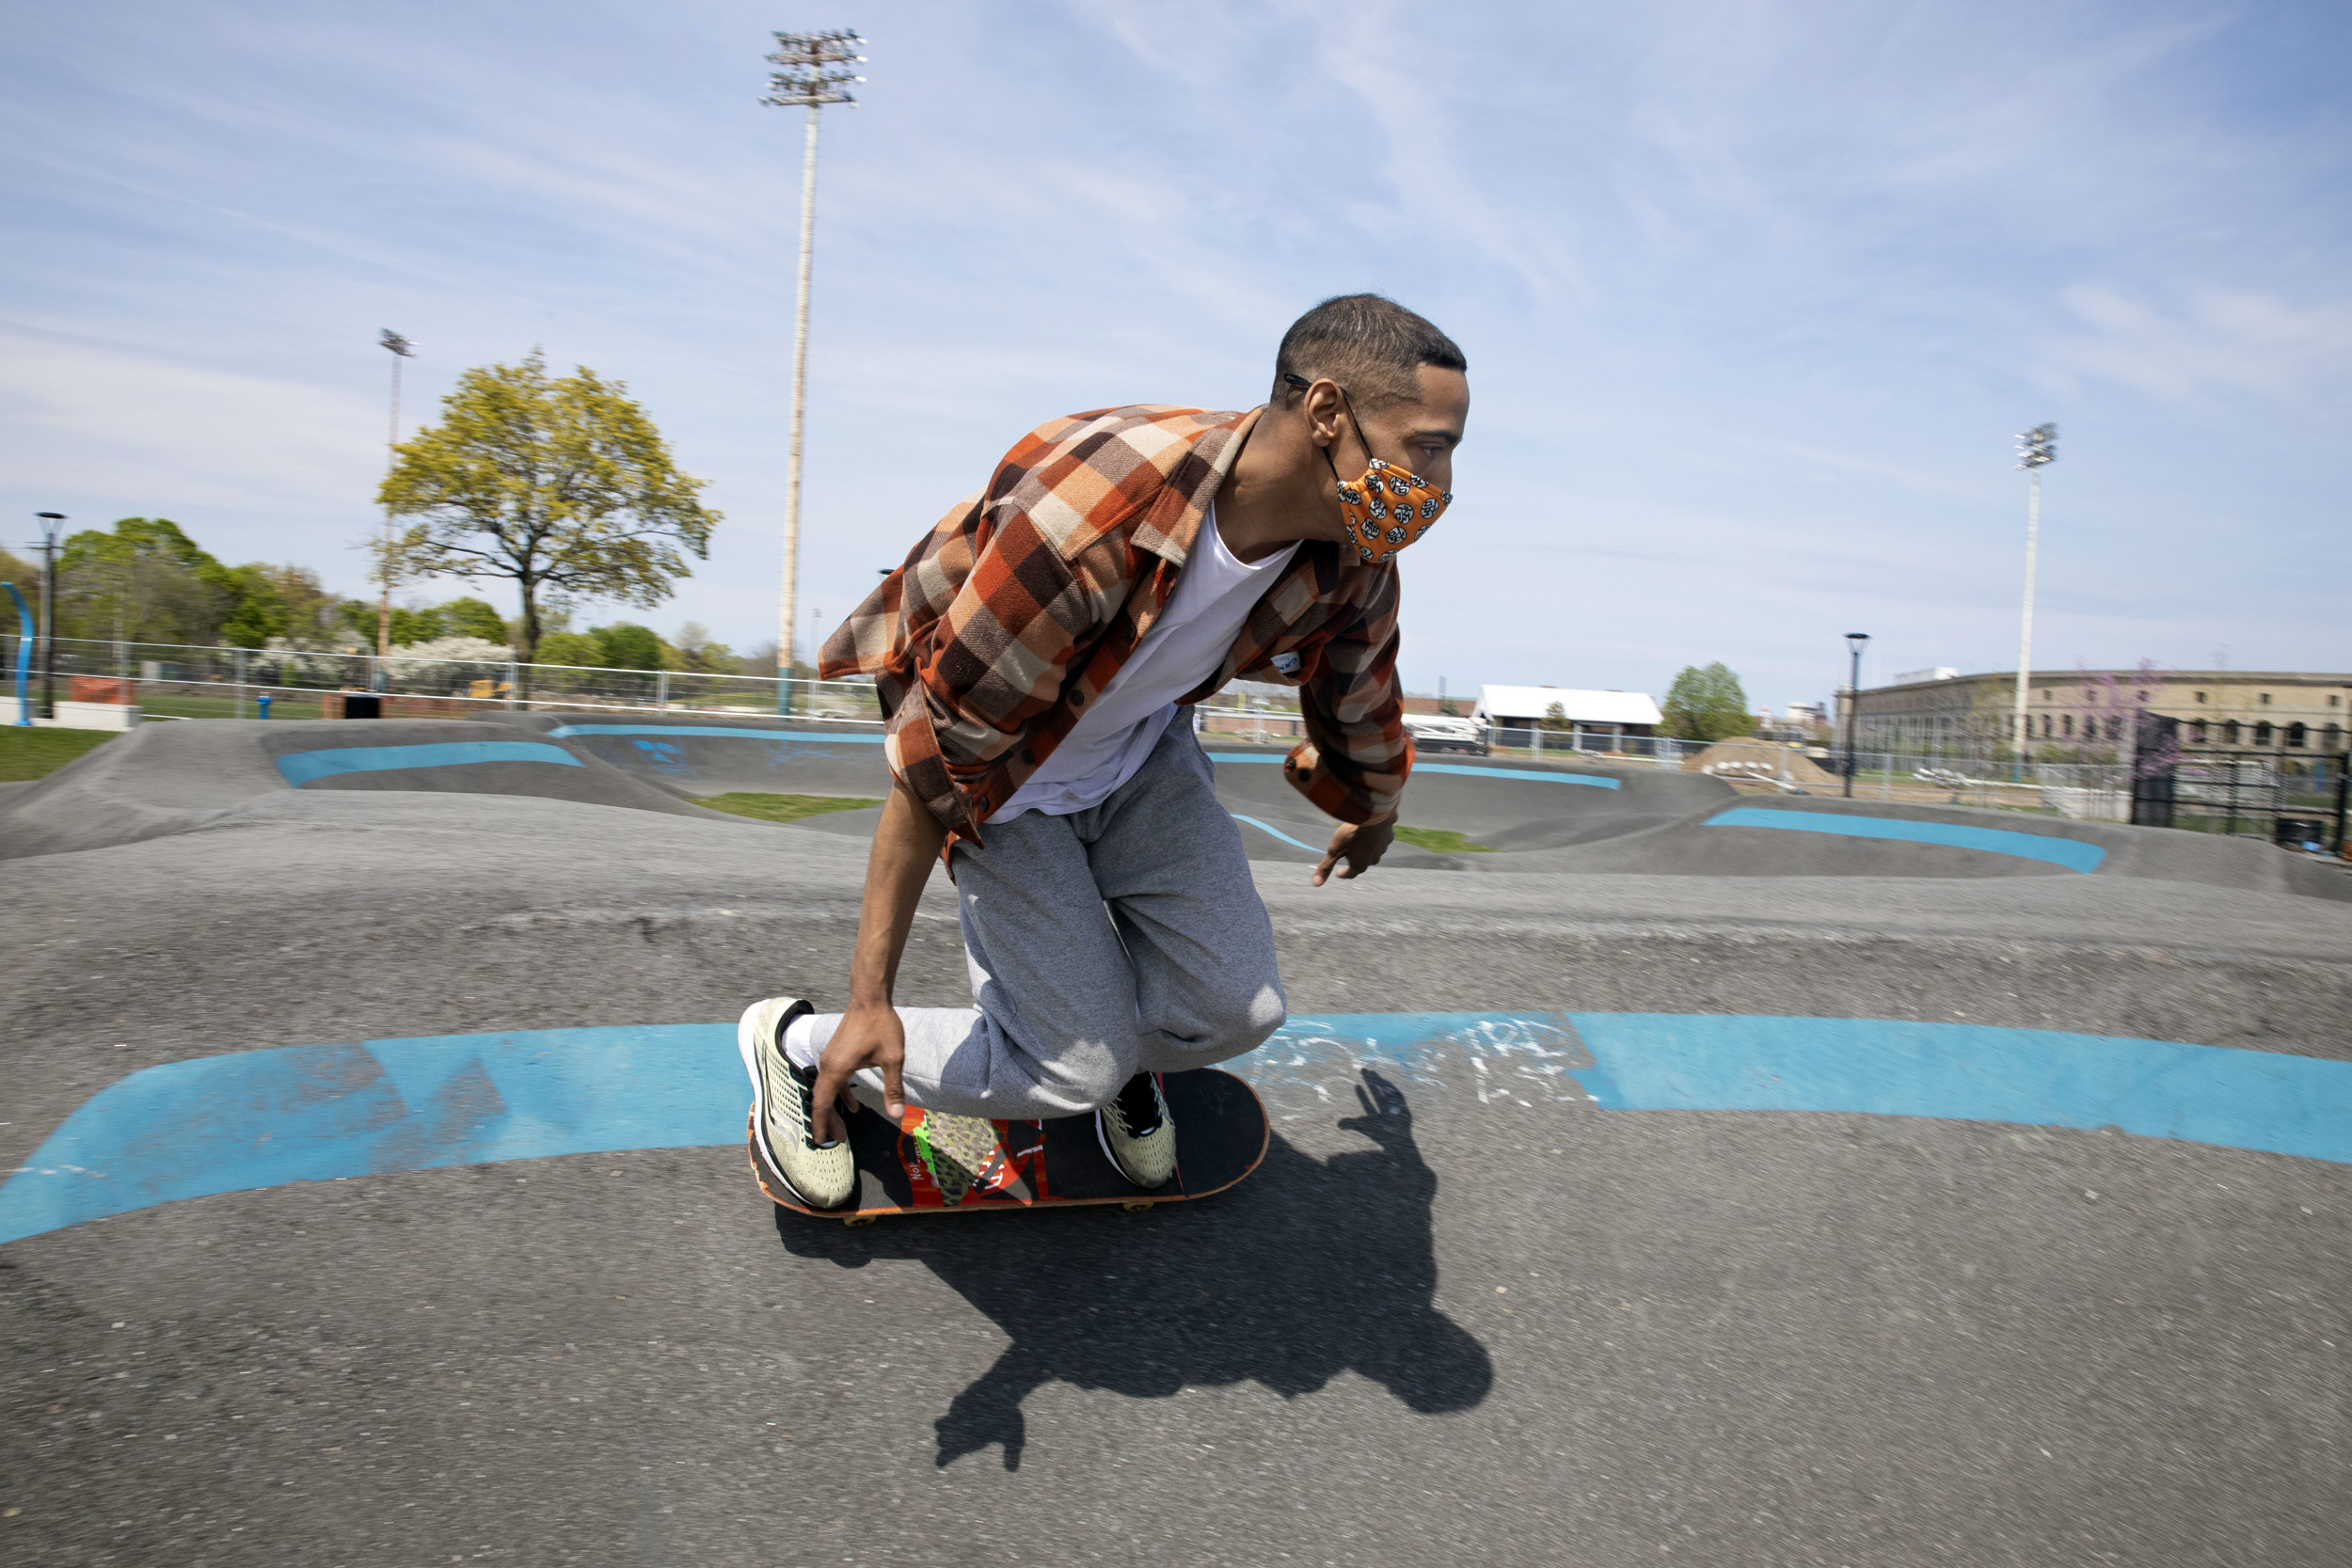 At the Smith Field in Allston, Will Newson, takes a relaxing ride around the pump track at the public skatepark.